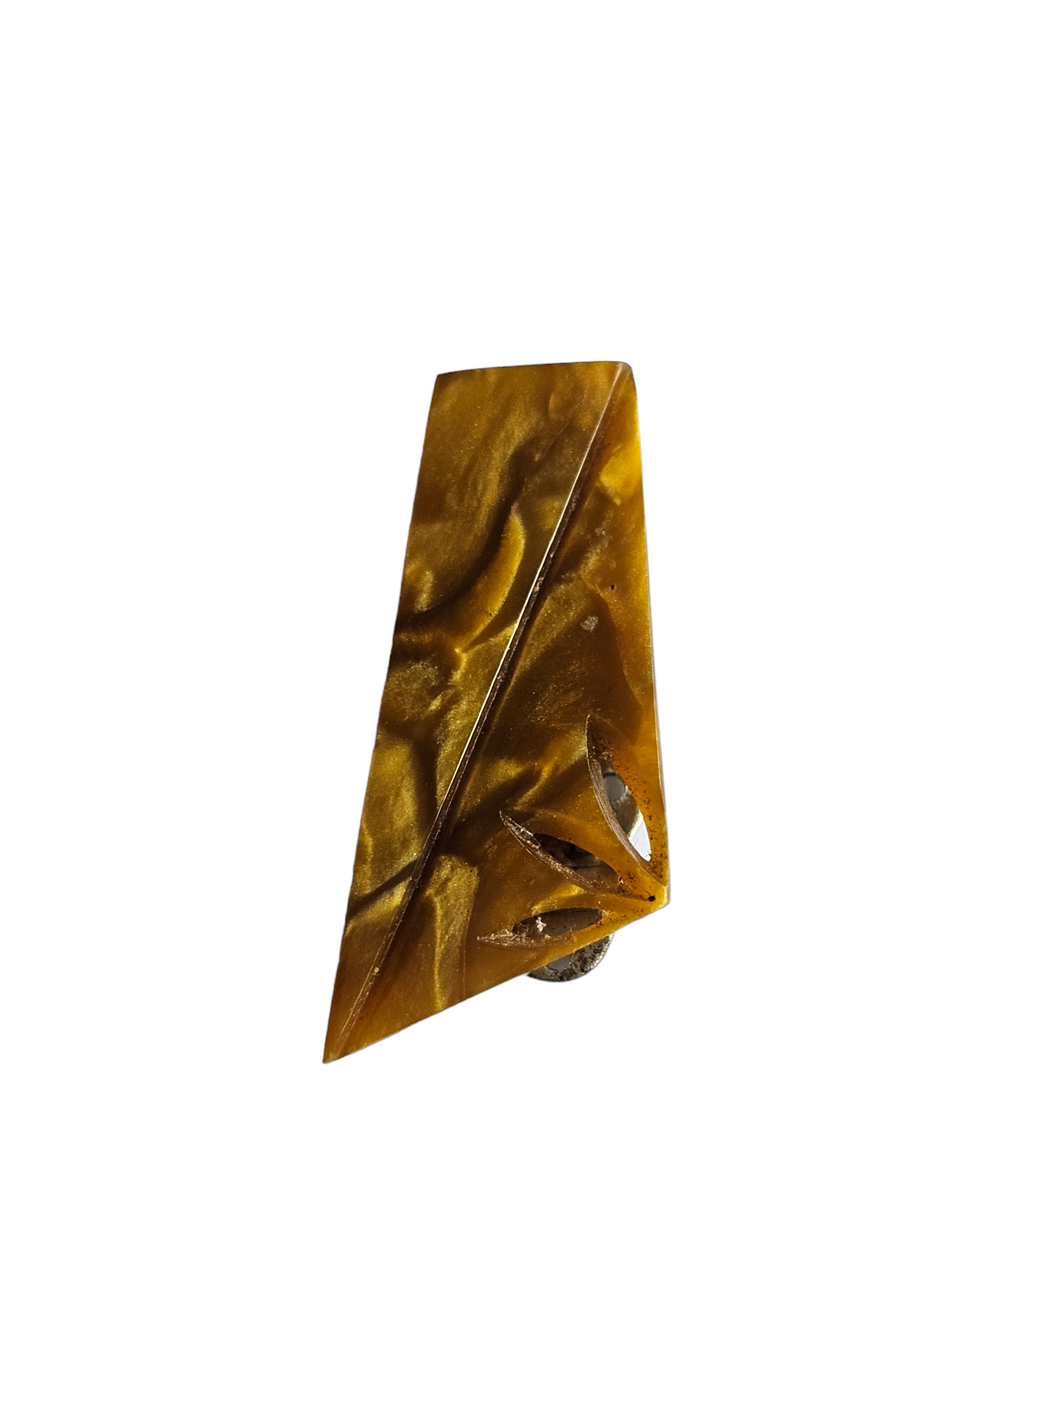 1940s Galalith Toffee Brown Dress Clip